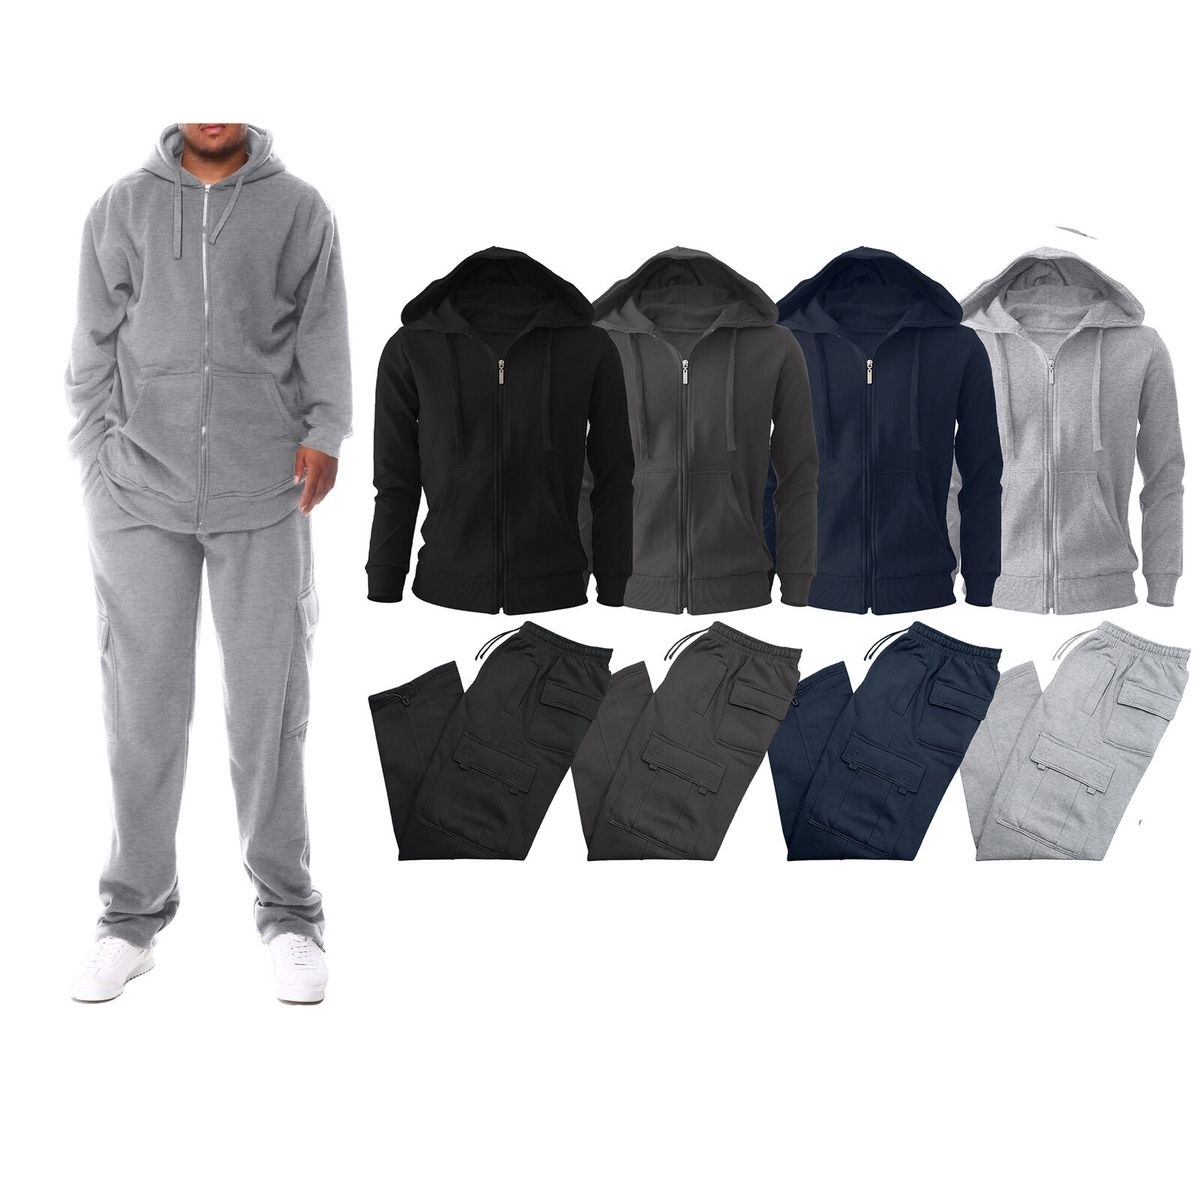 Multi-Pack: Men's Big & Tall Winter Warm Athletic Active Cozy Fleece Lined Multi-Pocket Full Zip Up Cargo Tracksuit - Grey, 2-pack, Small